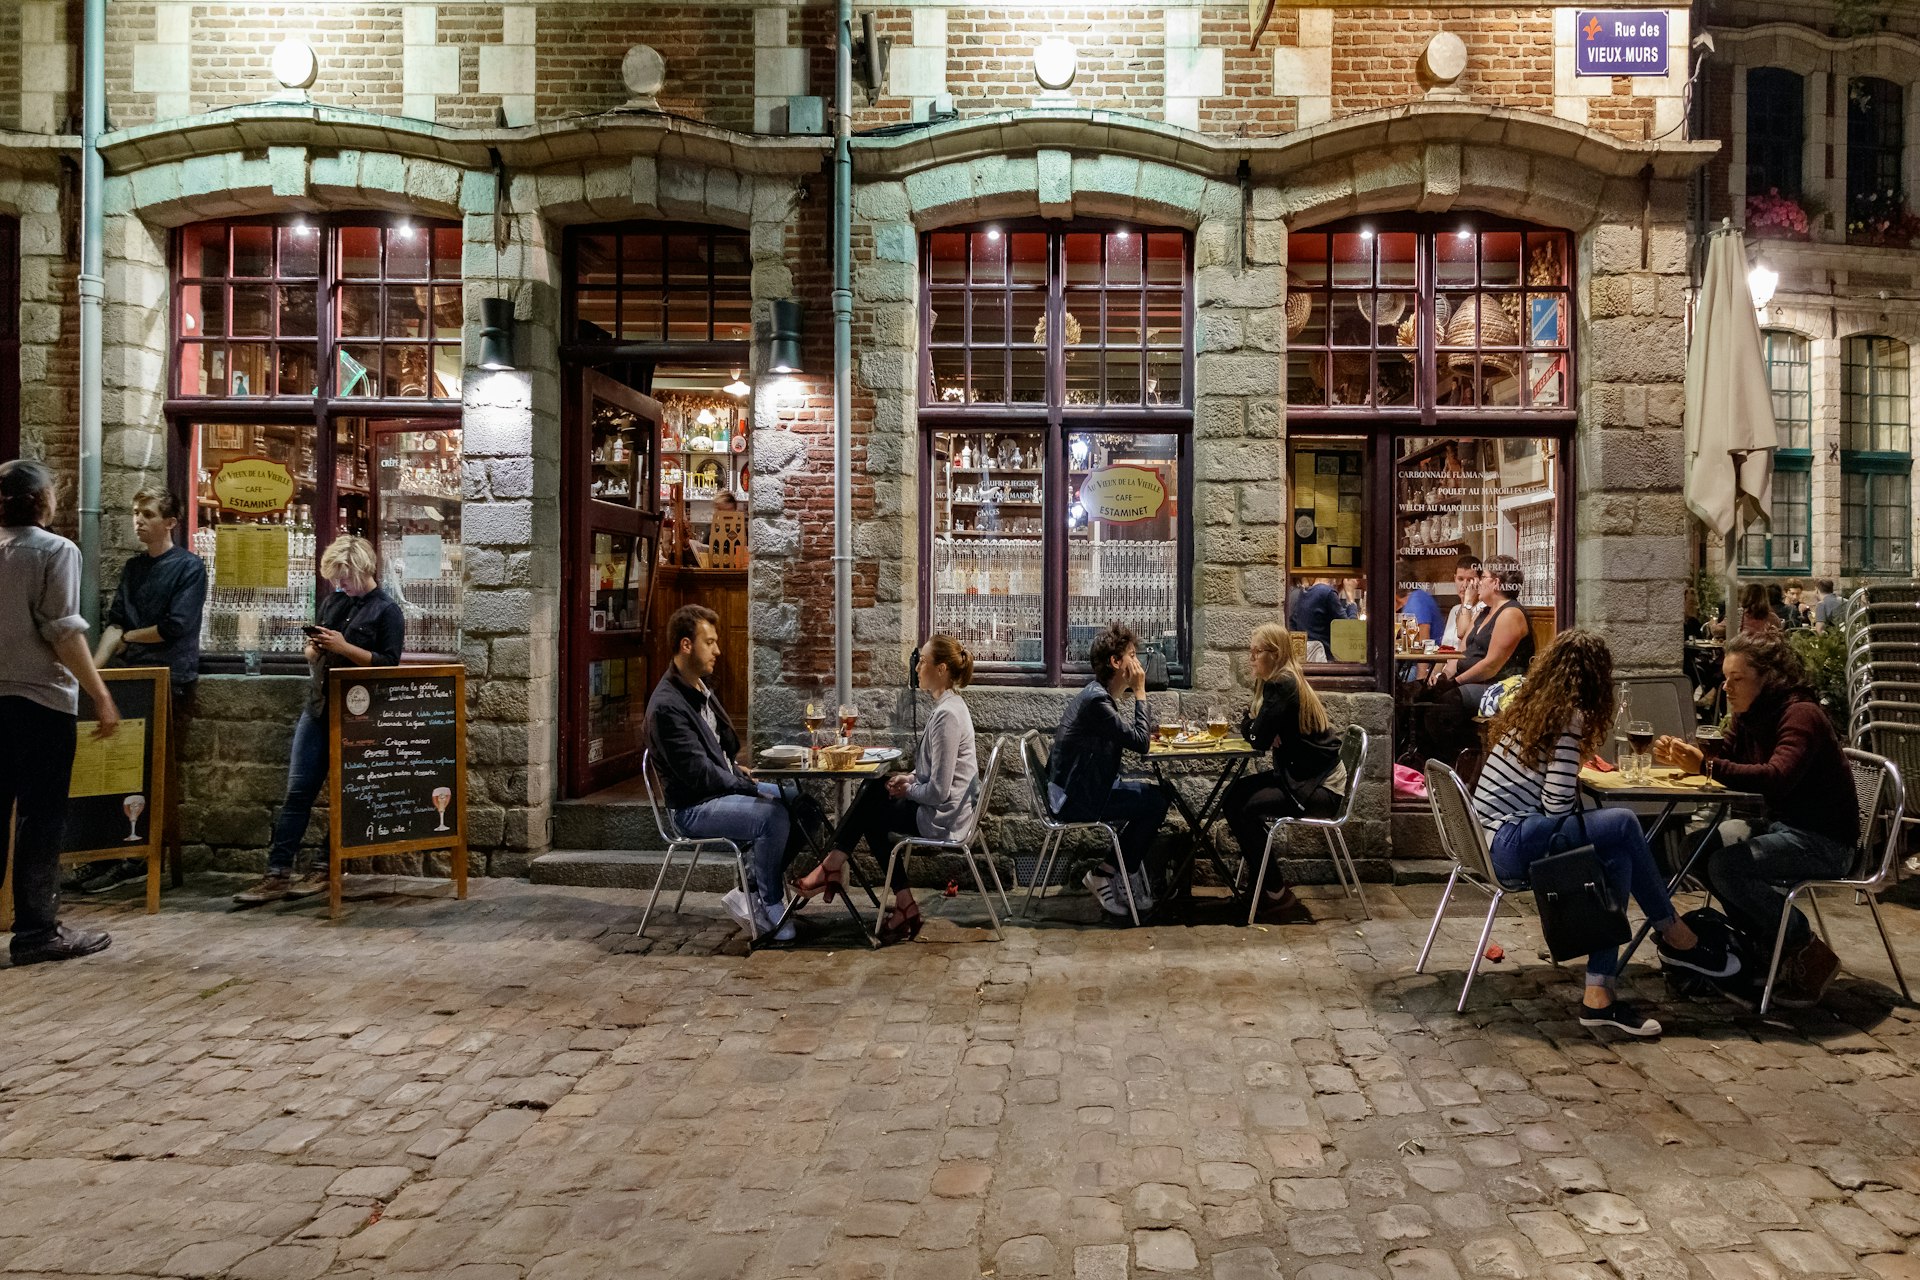 People sitting at tables outside a traditional bar in a historic building with a brick and stone facade.